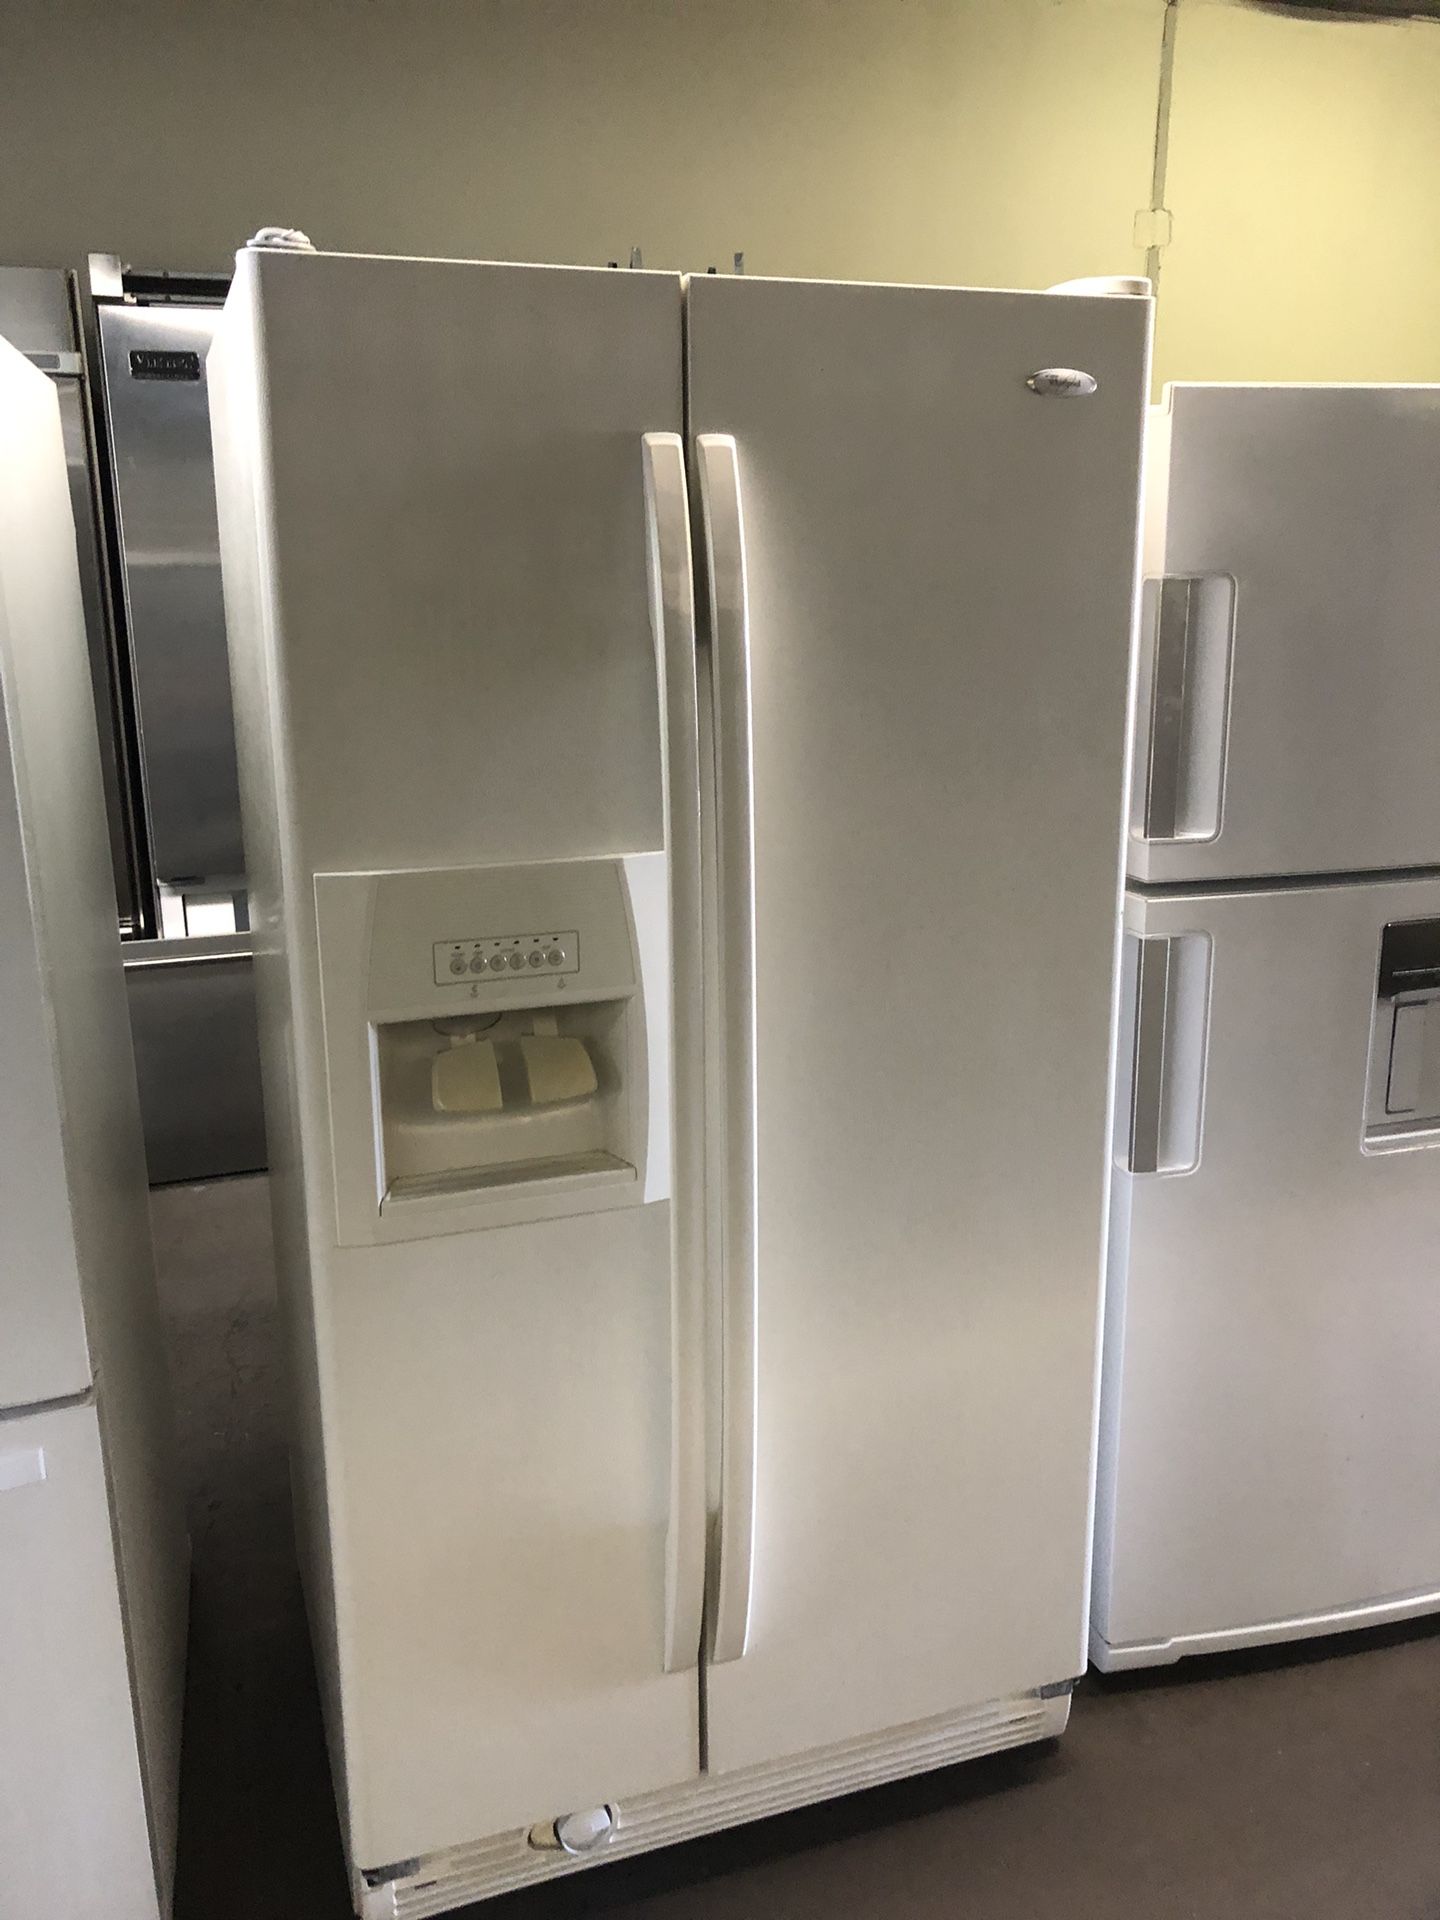 Whirlpool Almond Color Side By Side Refrigerator With Water And Ice Dispenser 